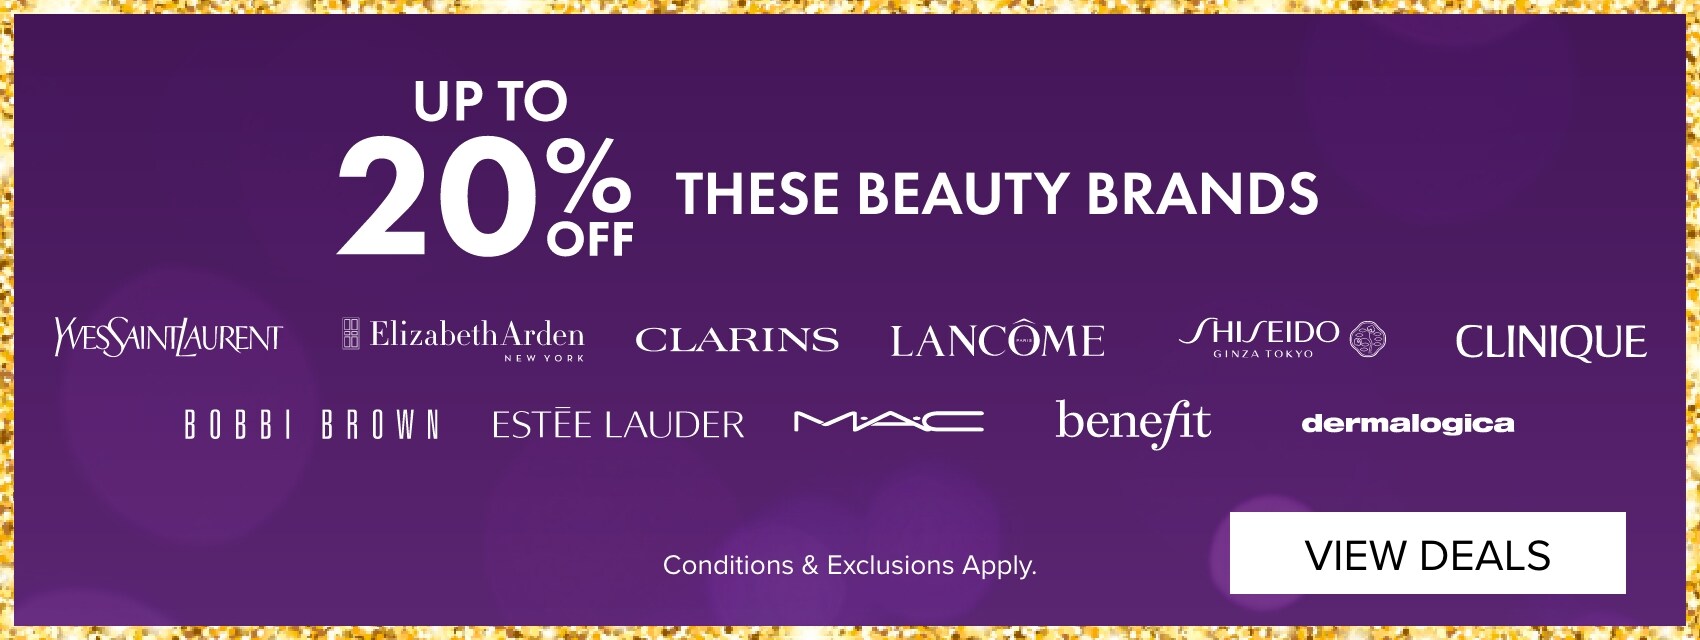 UP TO 20% OFF Selected Beauty Brands